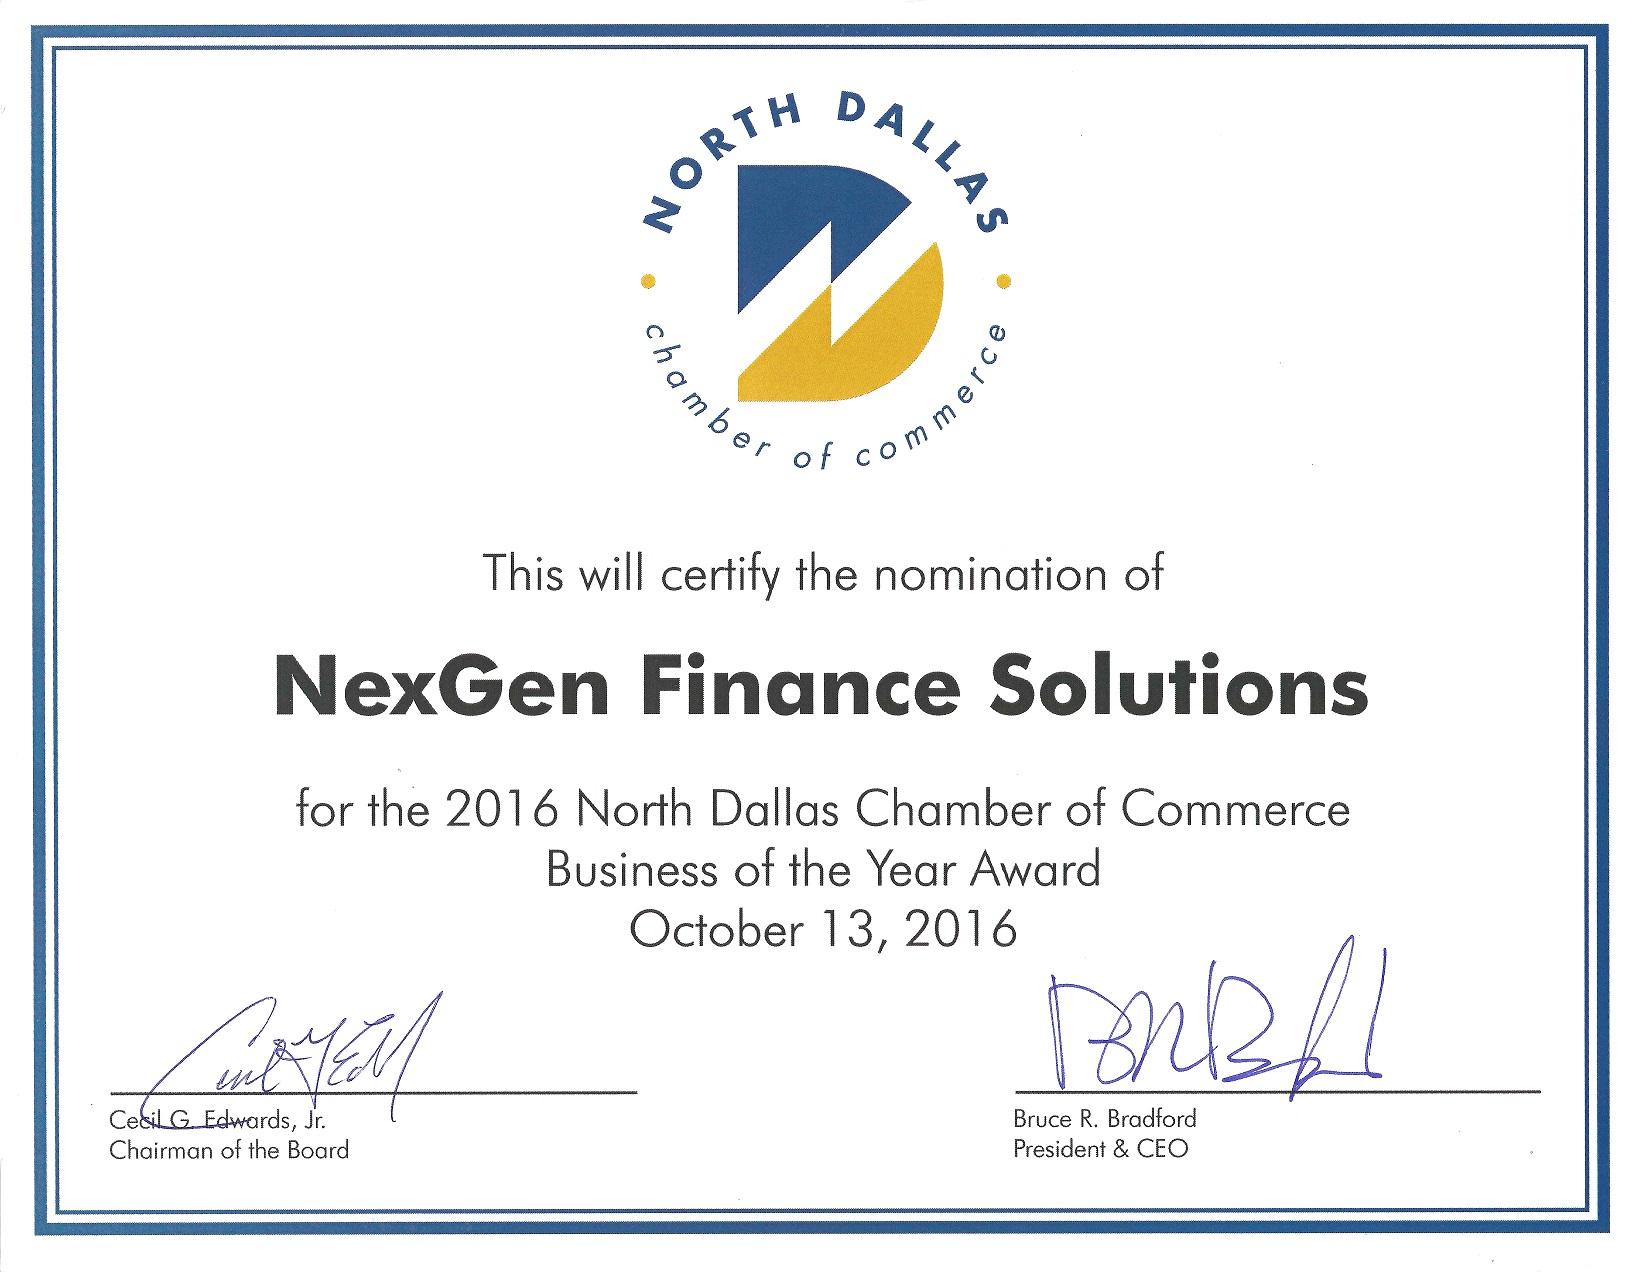 NexGen nominated for 2016 North Dallas Chamber of Commerce Business of Year